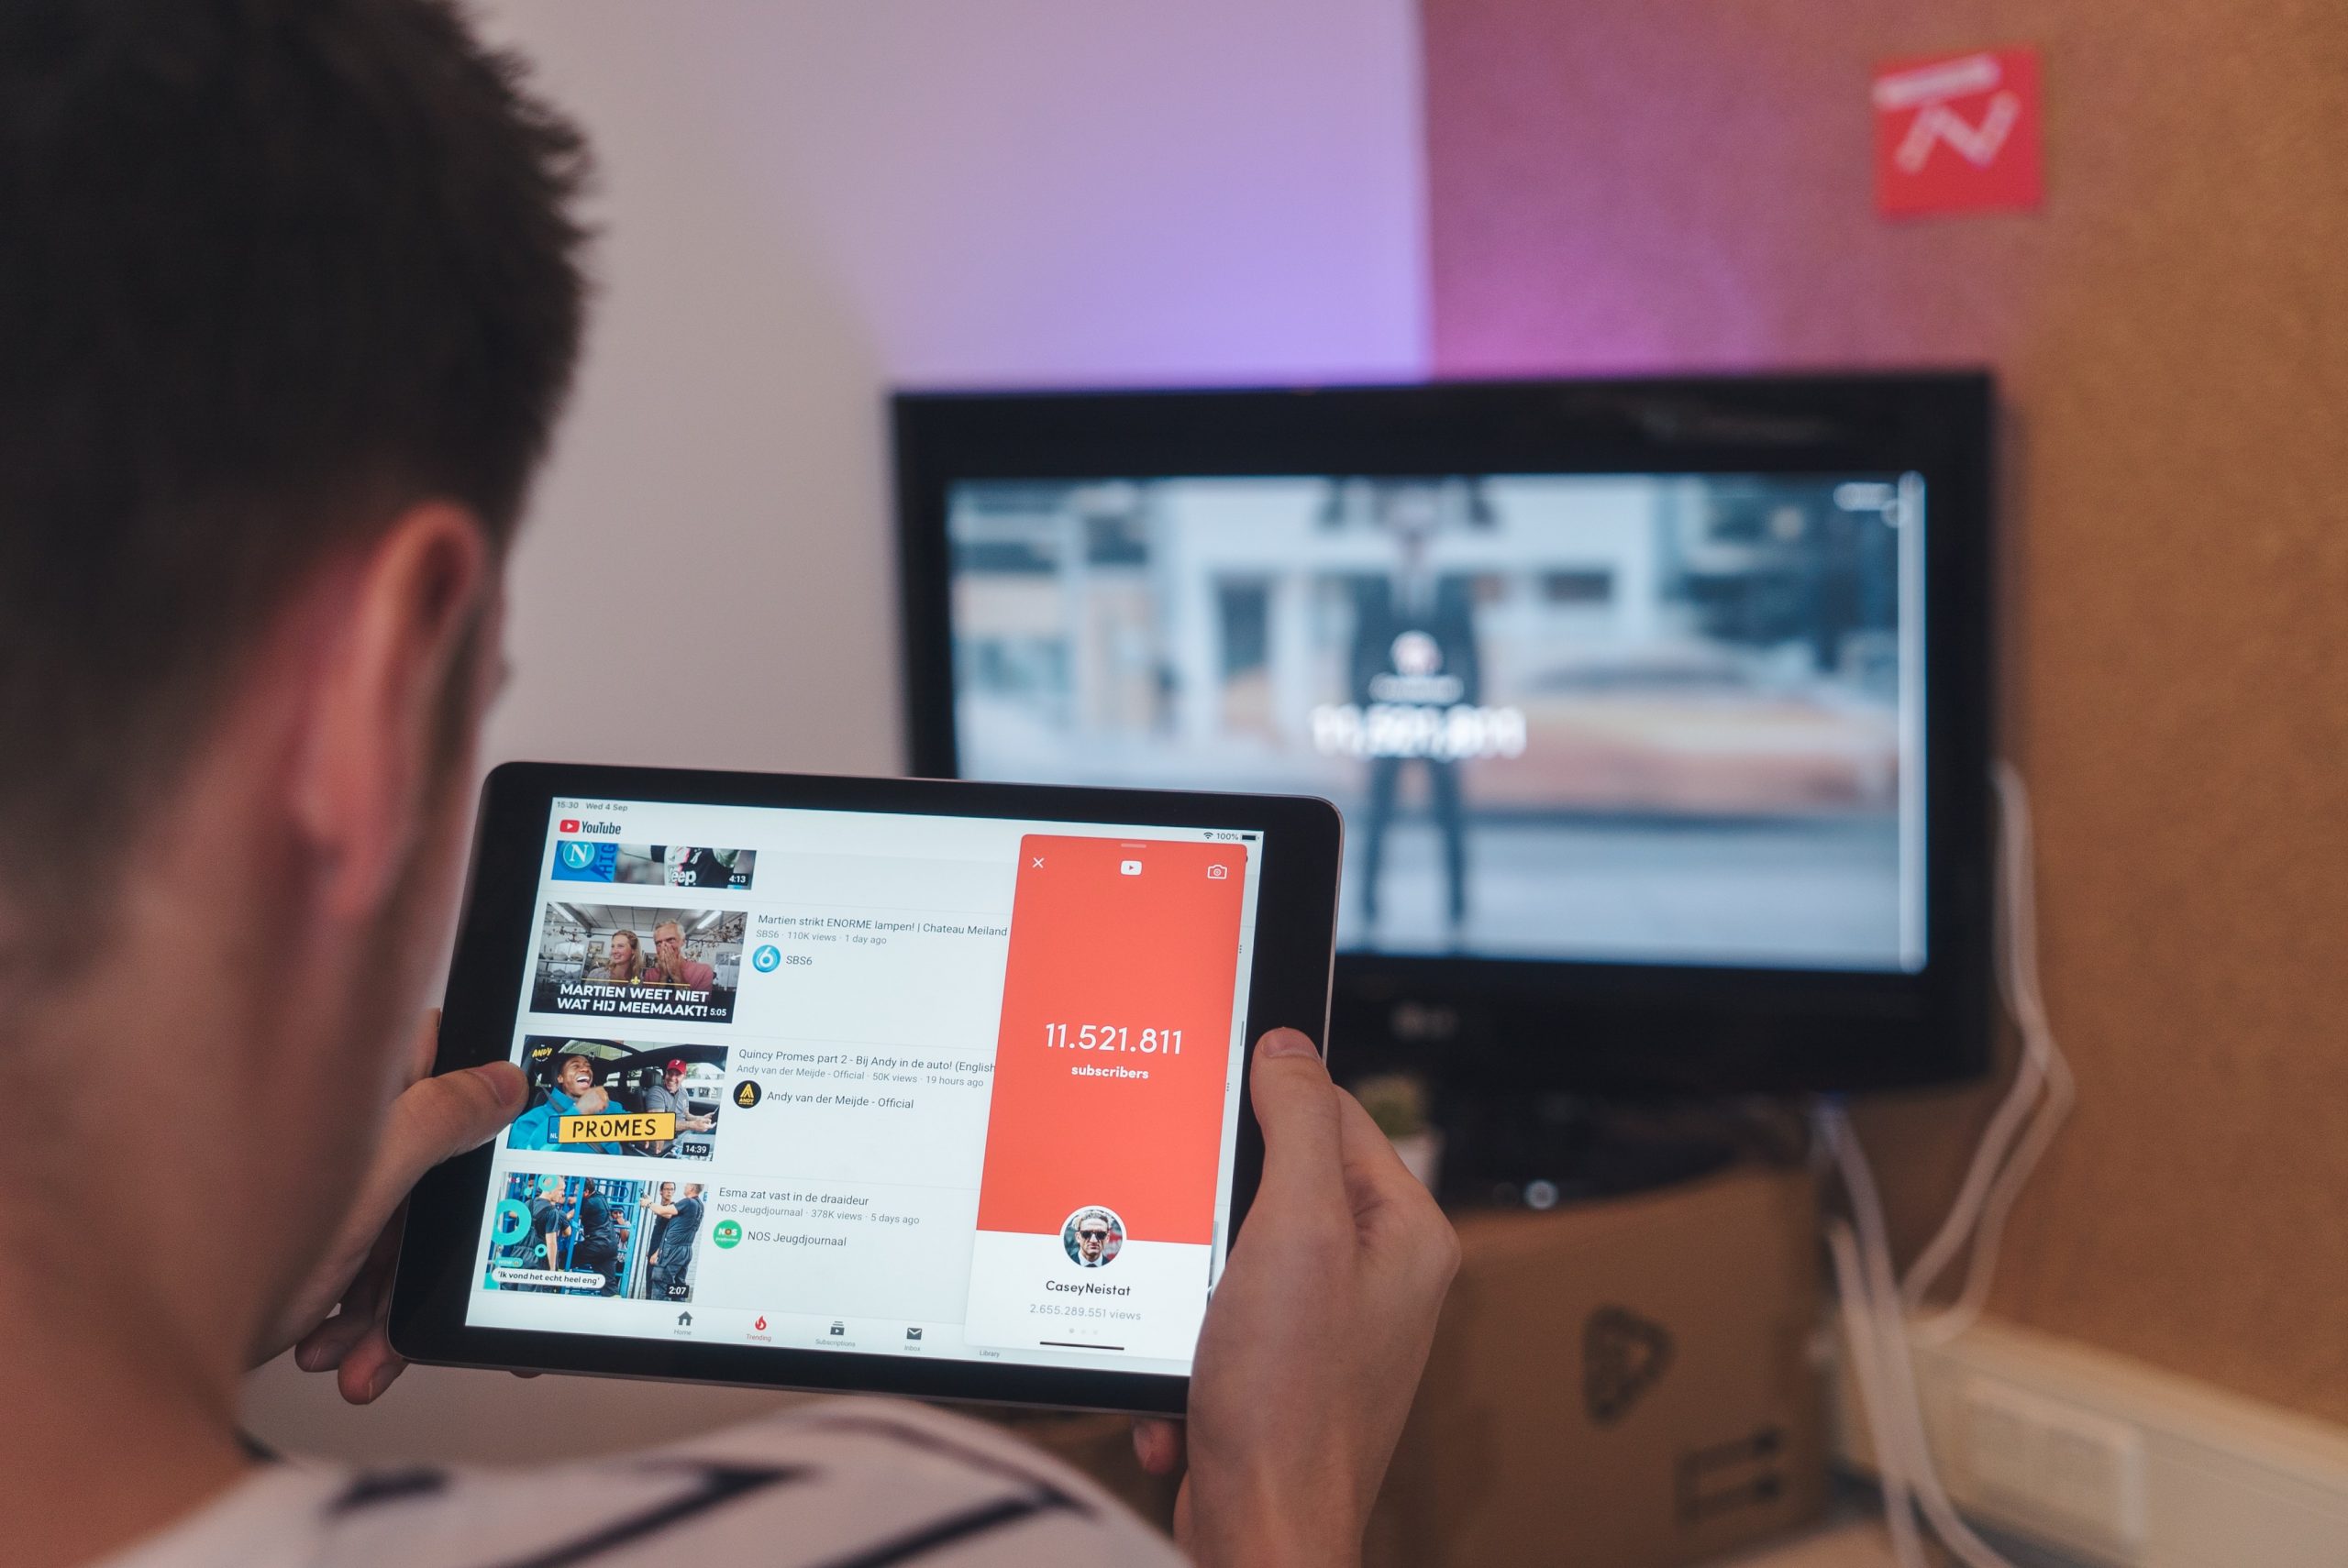 YouTube TV App Update. Read To Know More